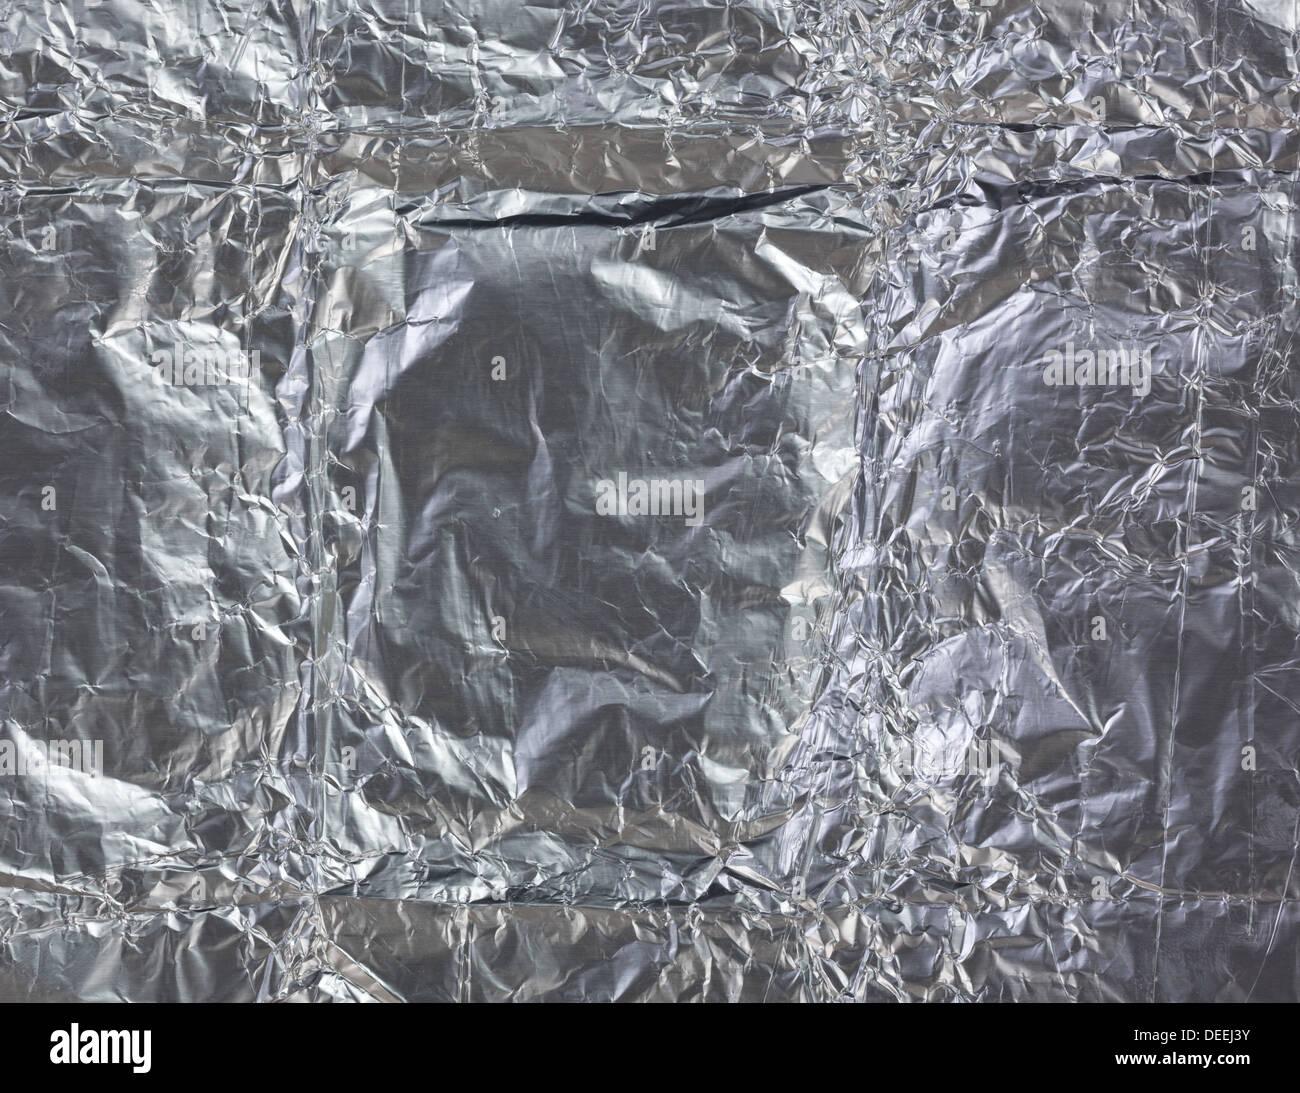 A very close view of used crinkled tin foil. Stock Photo